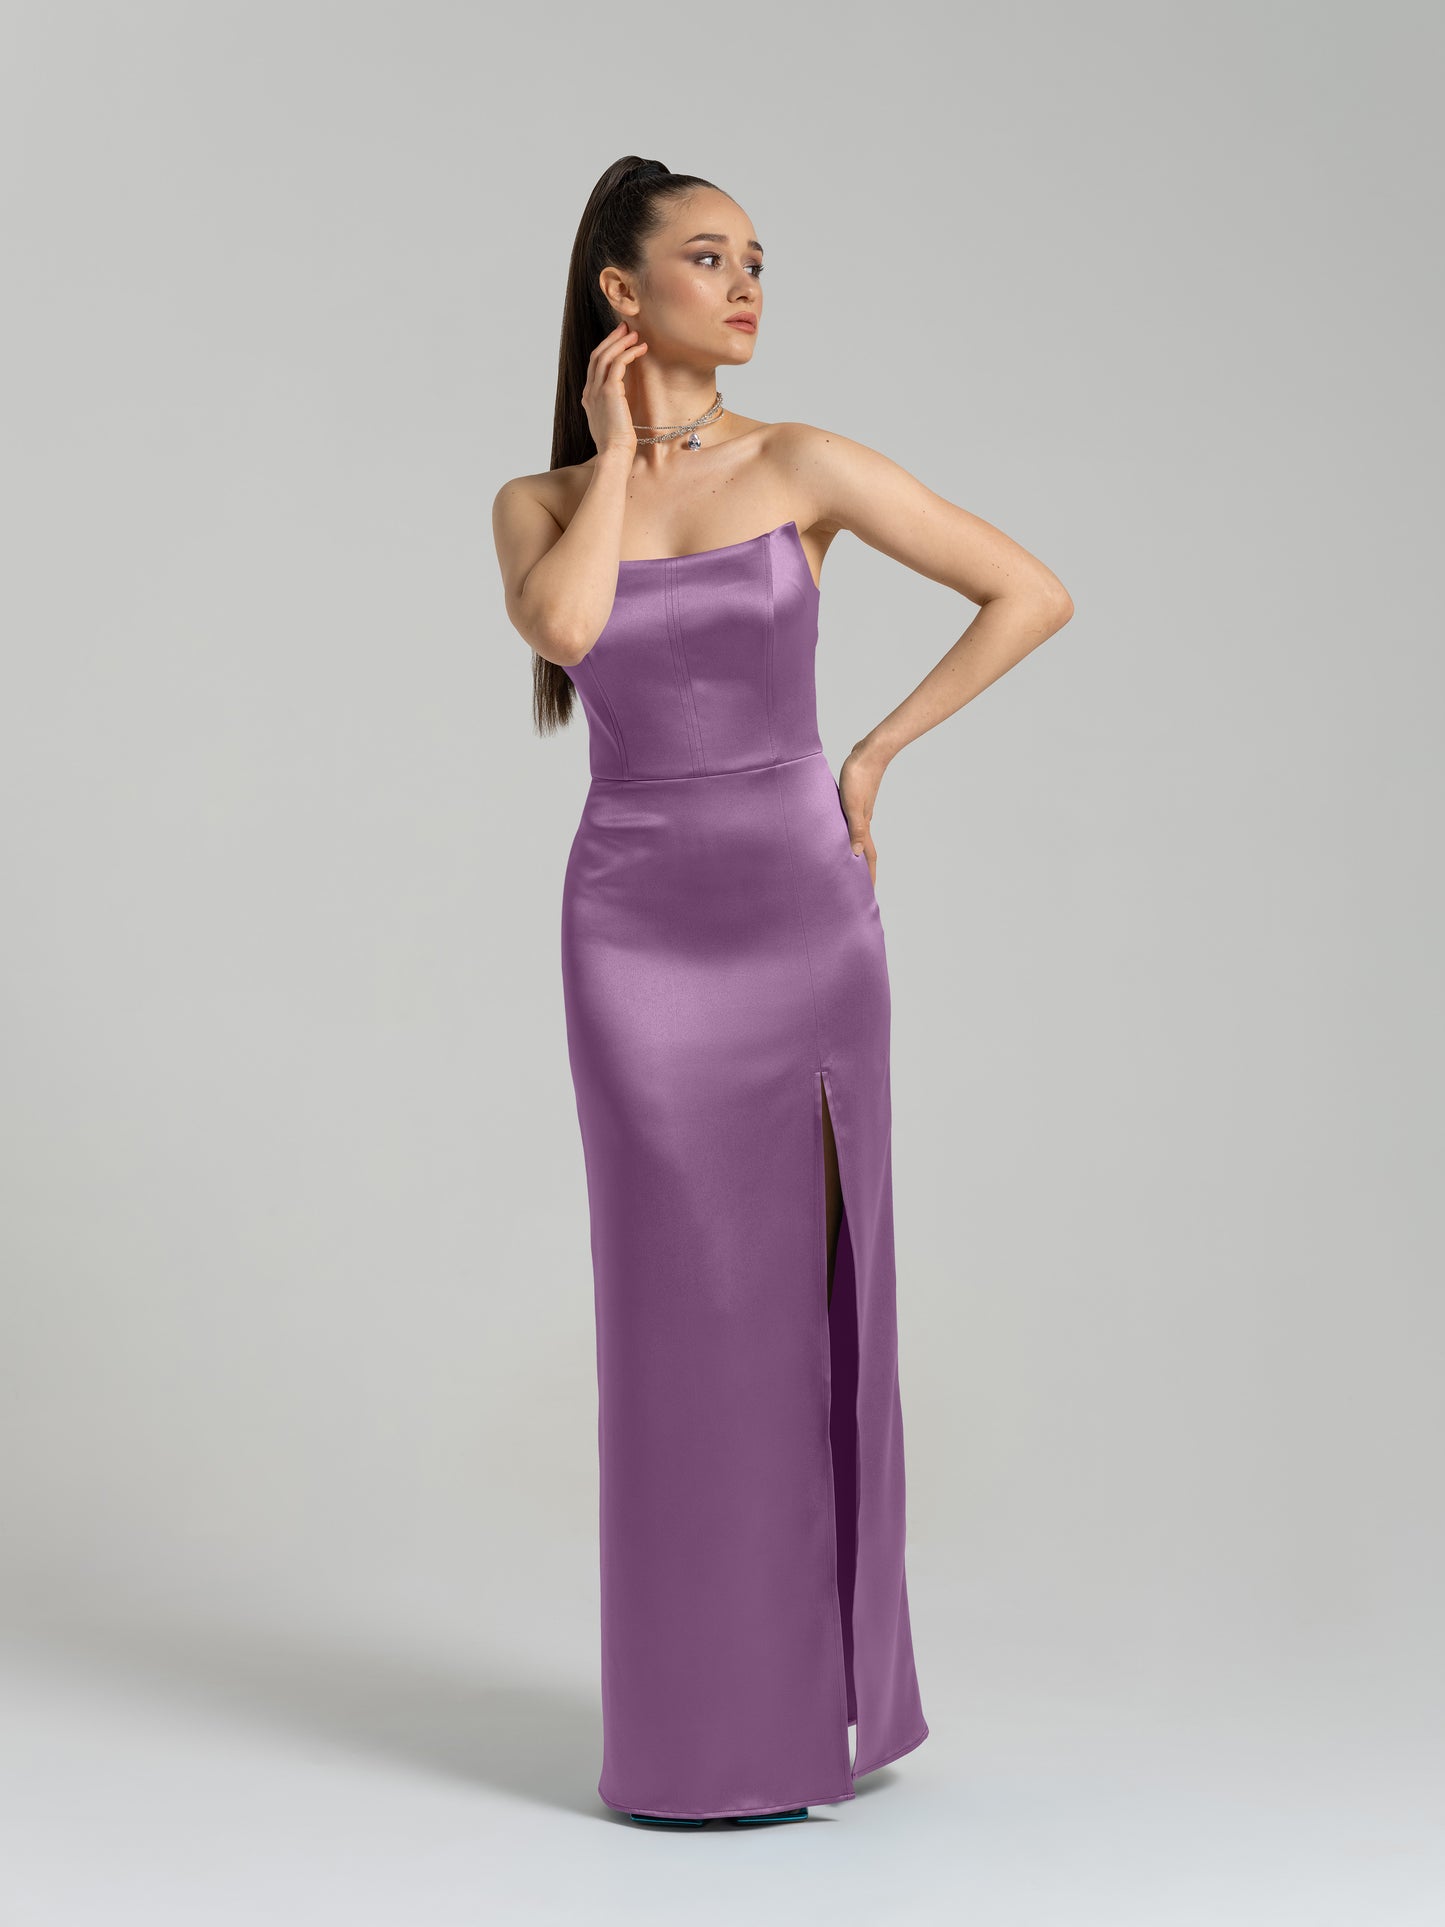 Queen of Hearts Satin Maxi Dress - Imperial Purple